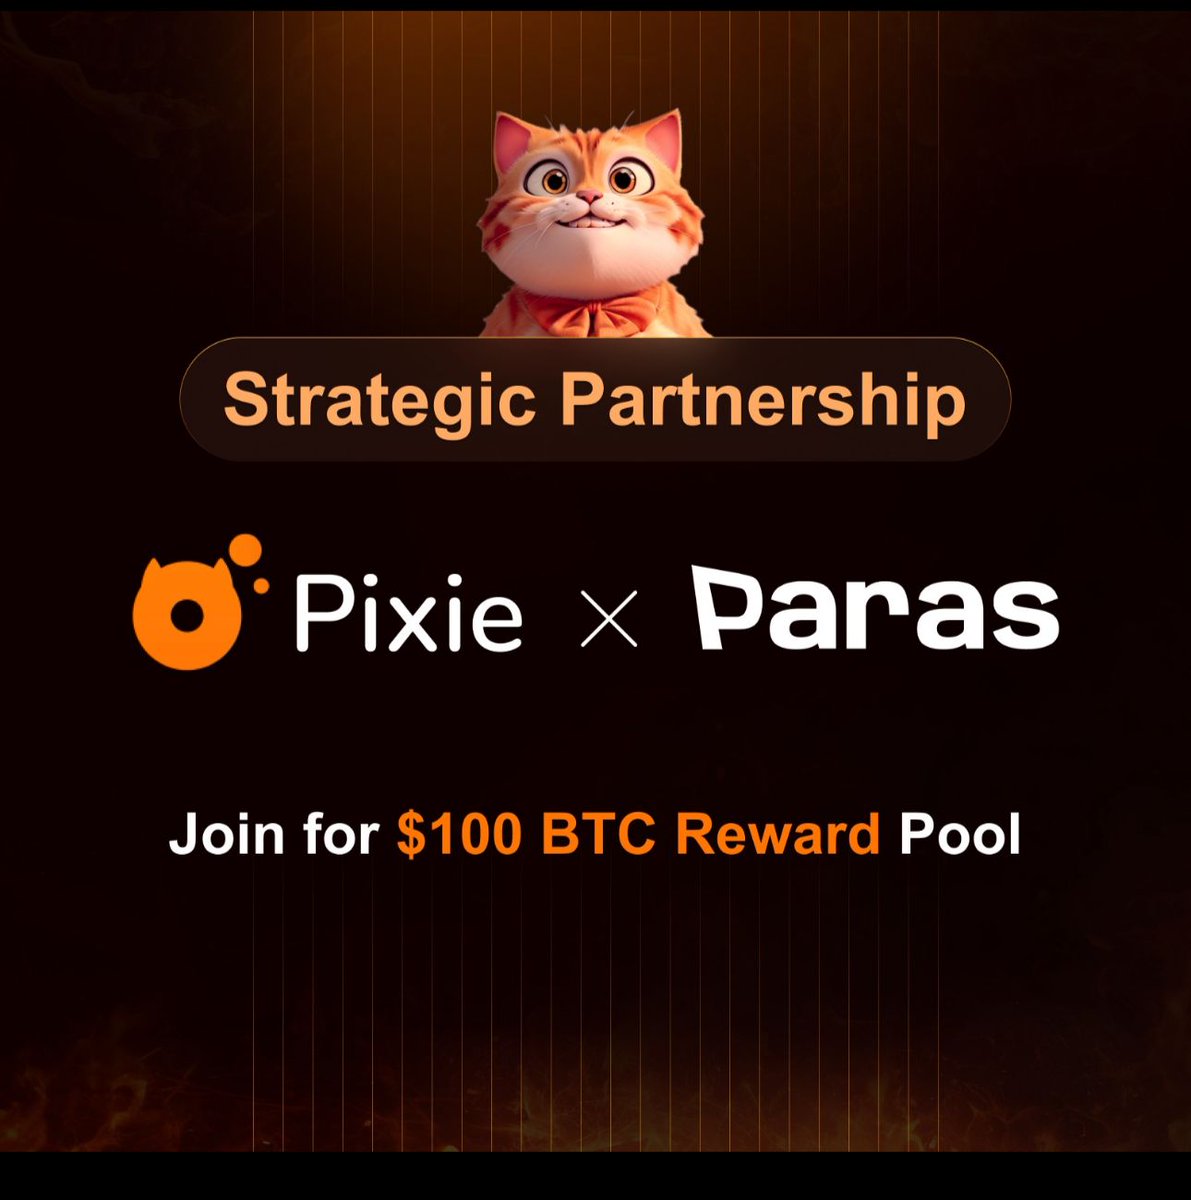 Excited to announce a new partnership between @ParasHQ and @PixieApp! 🎊 Complete the missions below to enter the giveaway $100 in $BTC 👇 ✅Follow @Pixieapp & @EASTBlue_io ✅RT + @ 3 friends ✅Install Pixie app here: pixie.xyz/en/download-pr… 2 winners & 48 hours left!